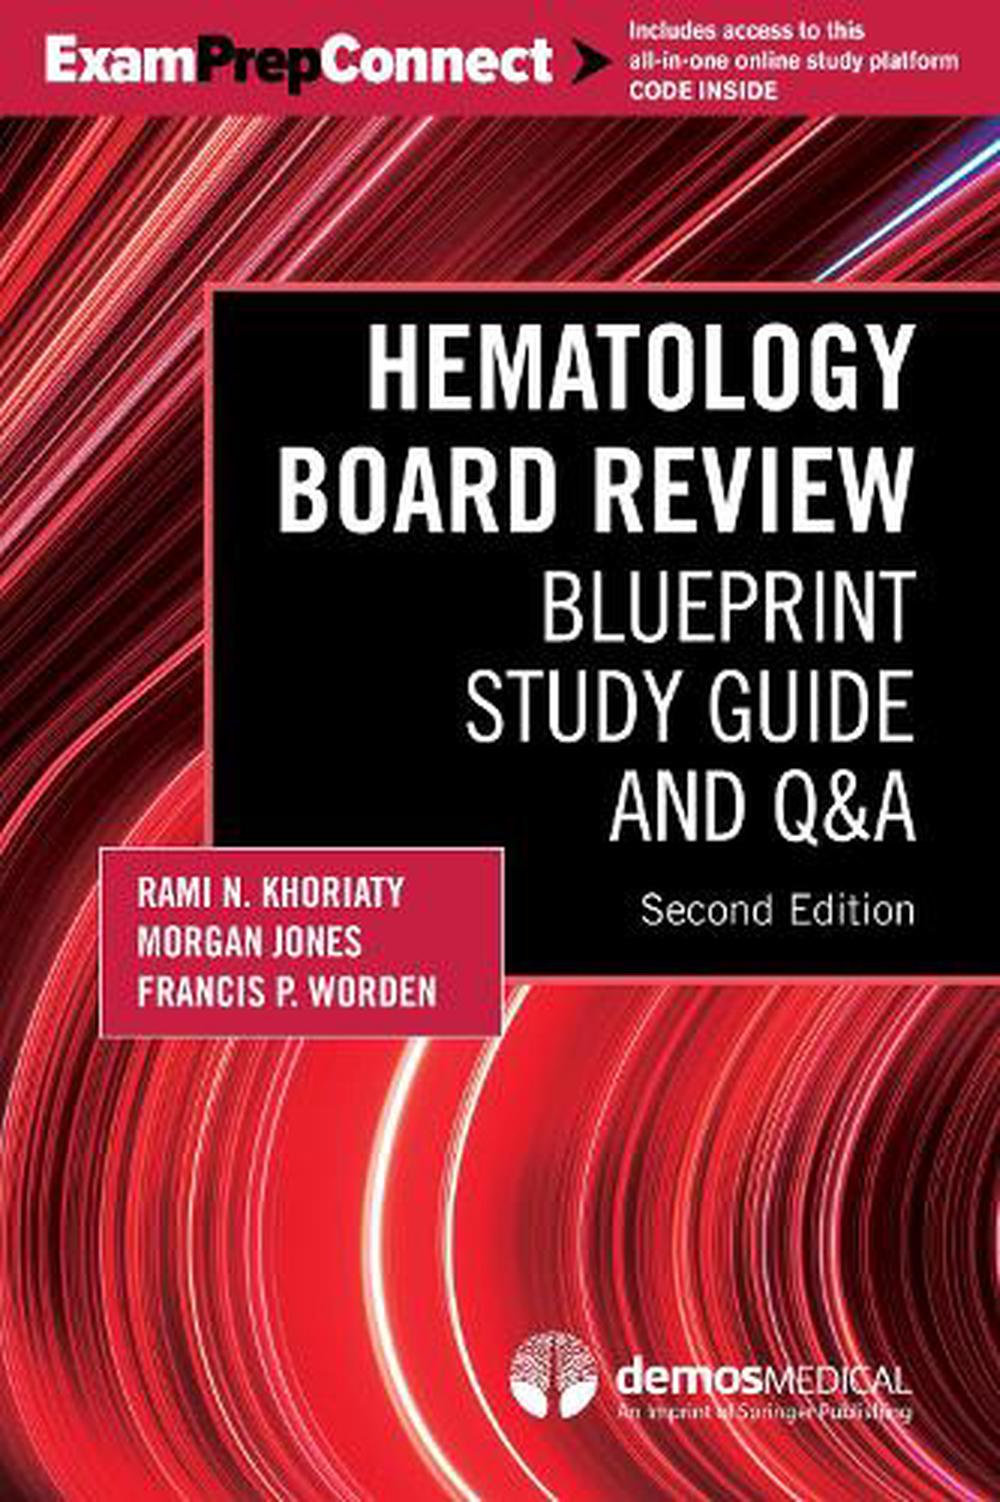 The　Hematology　Buy　by　at　Paperback,　Board　online　N.　9780826188021　Review　Nile　Rami　Khoriaty,